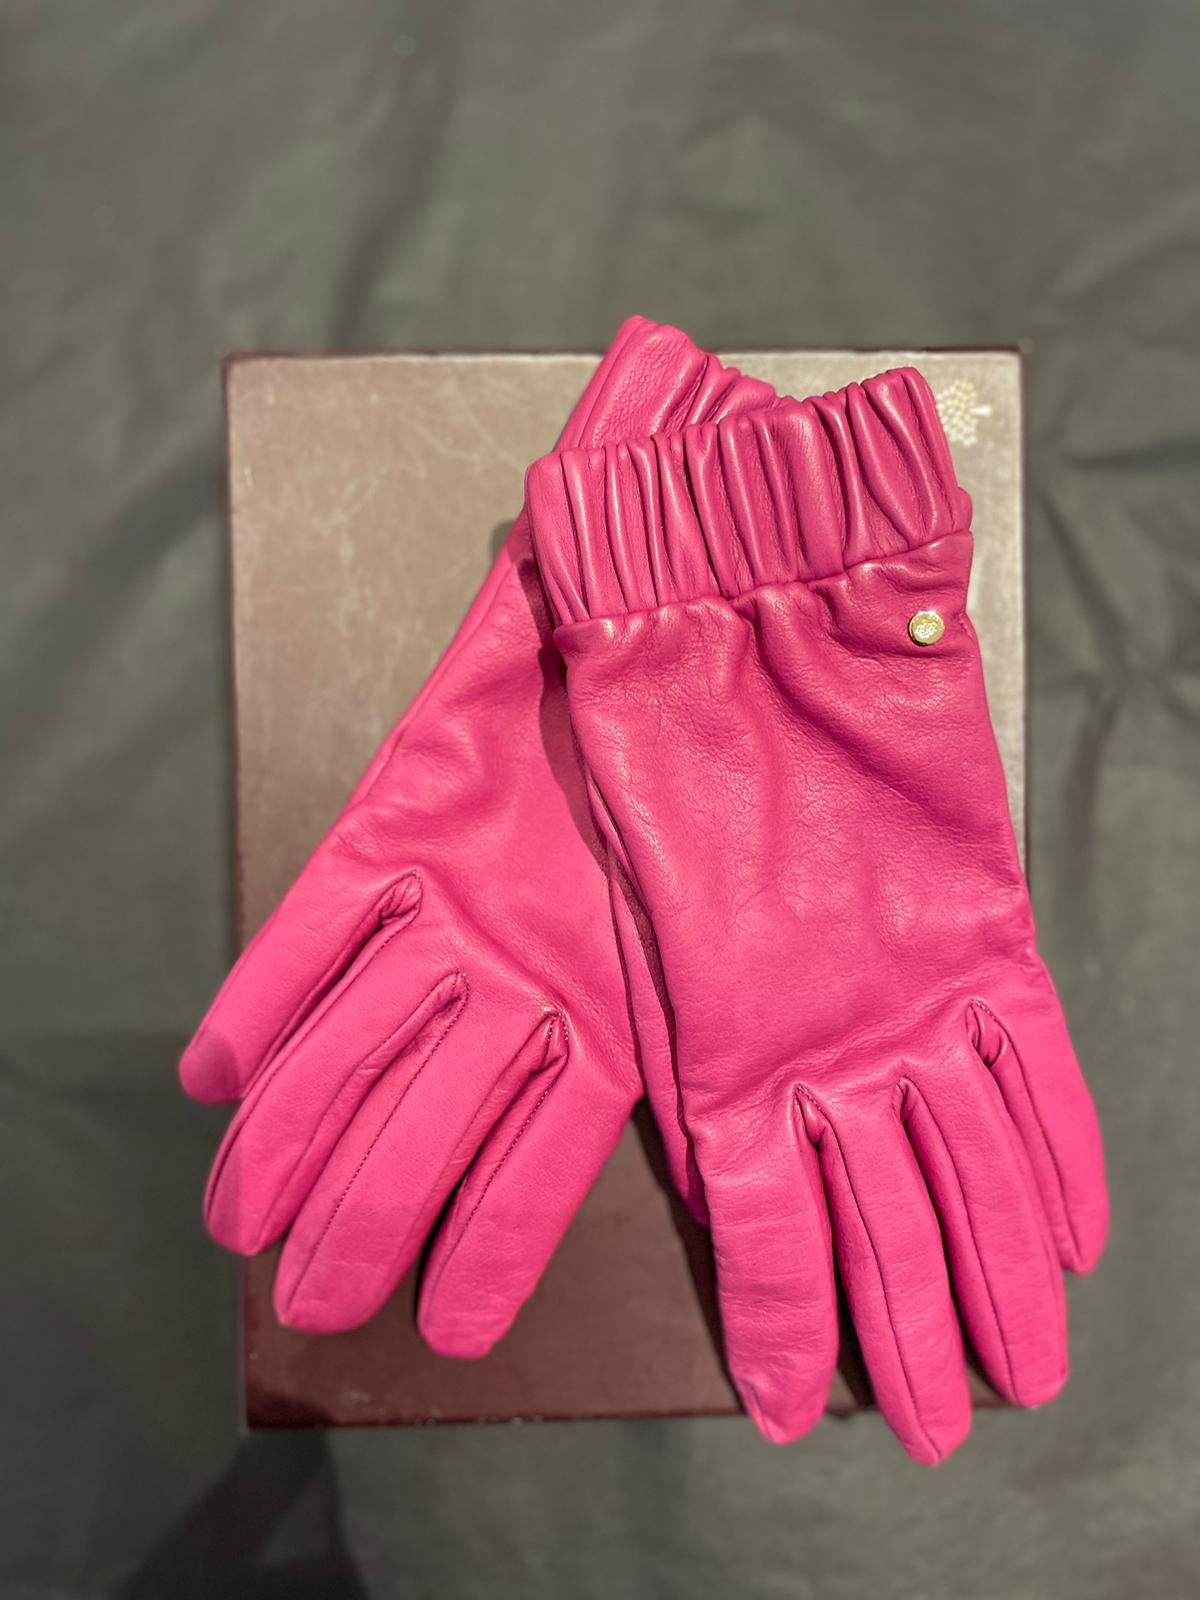 Mulberry leather gloves with cashmere lining size s